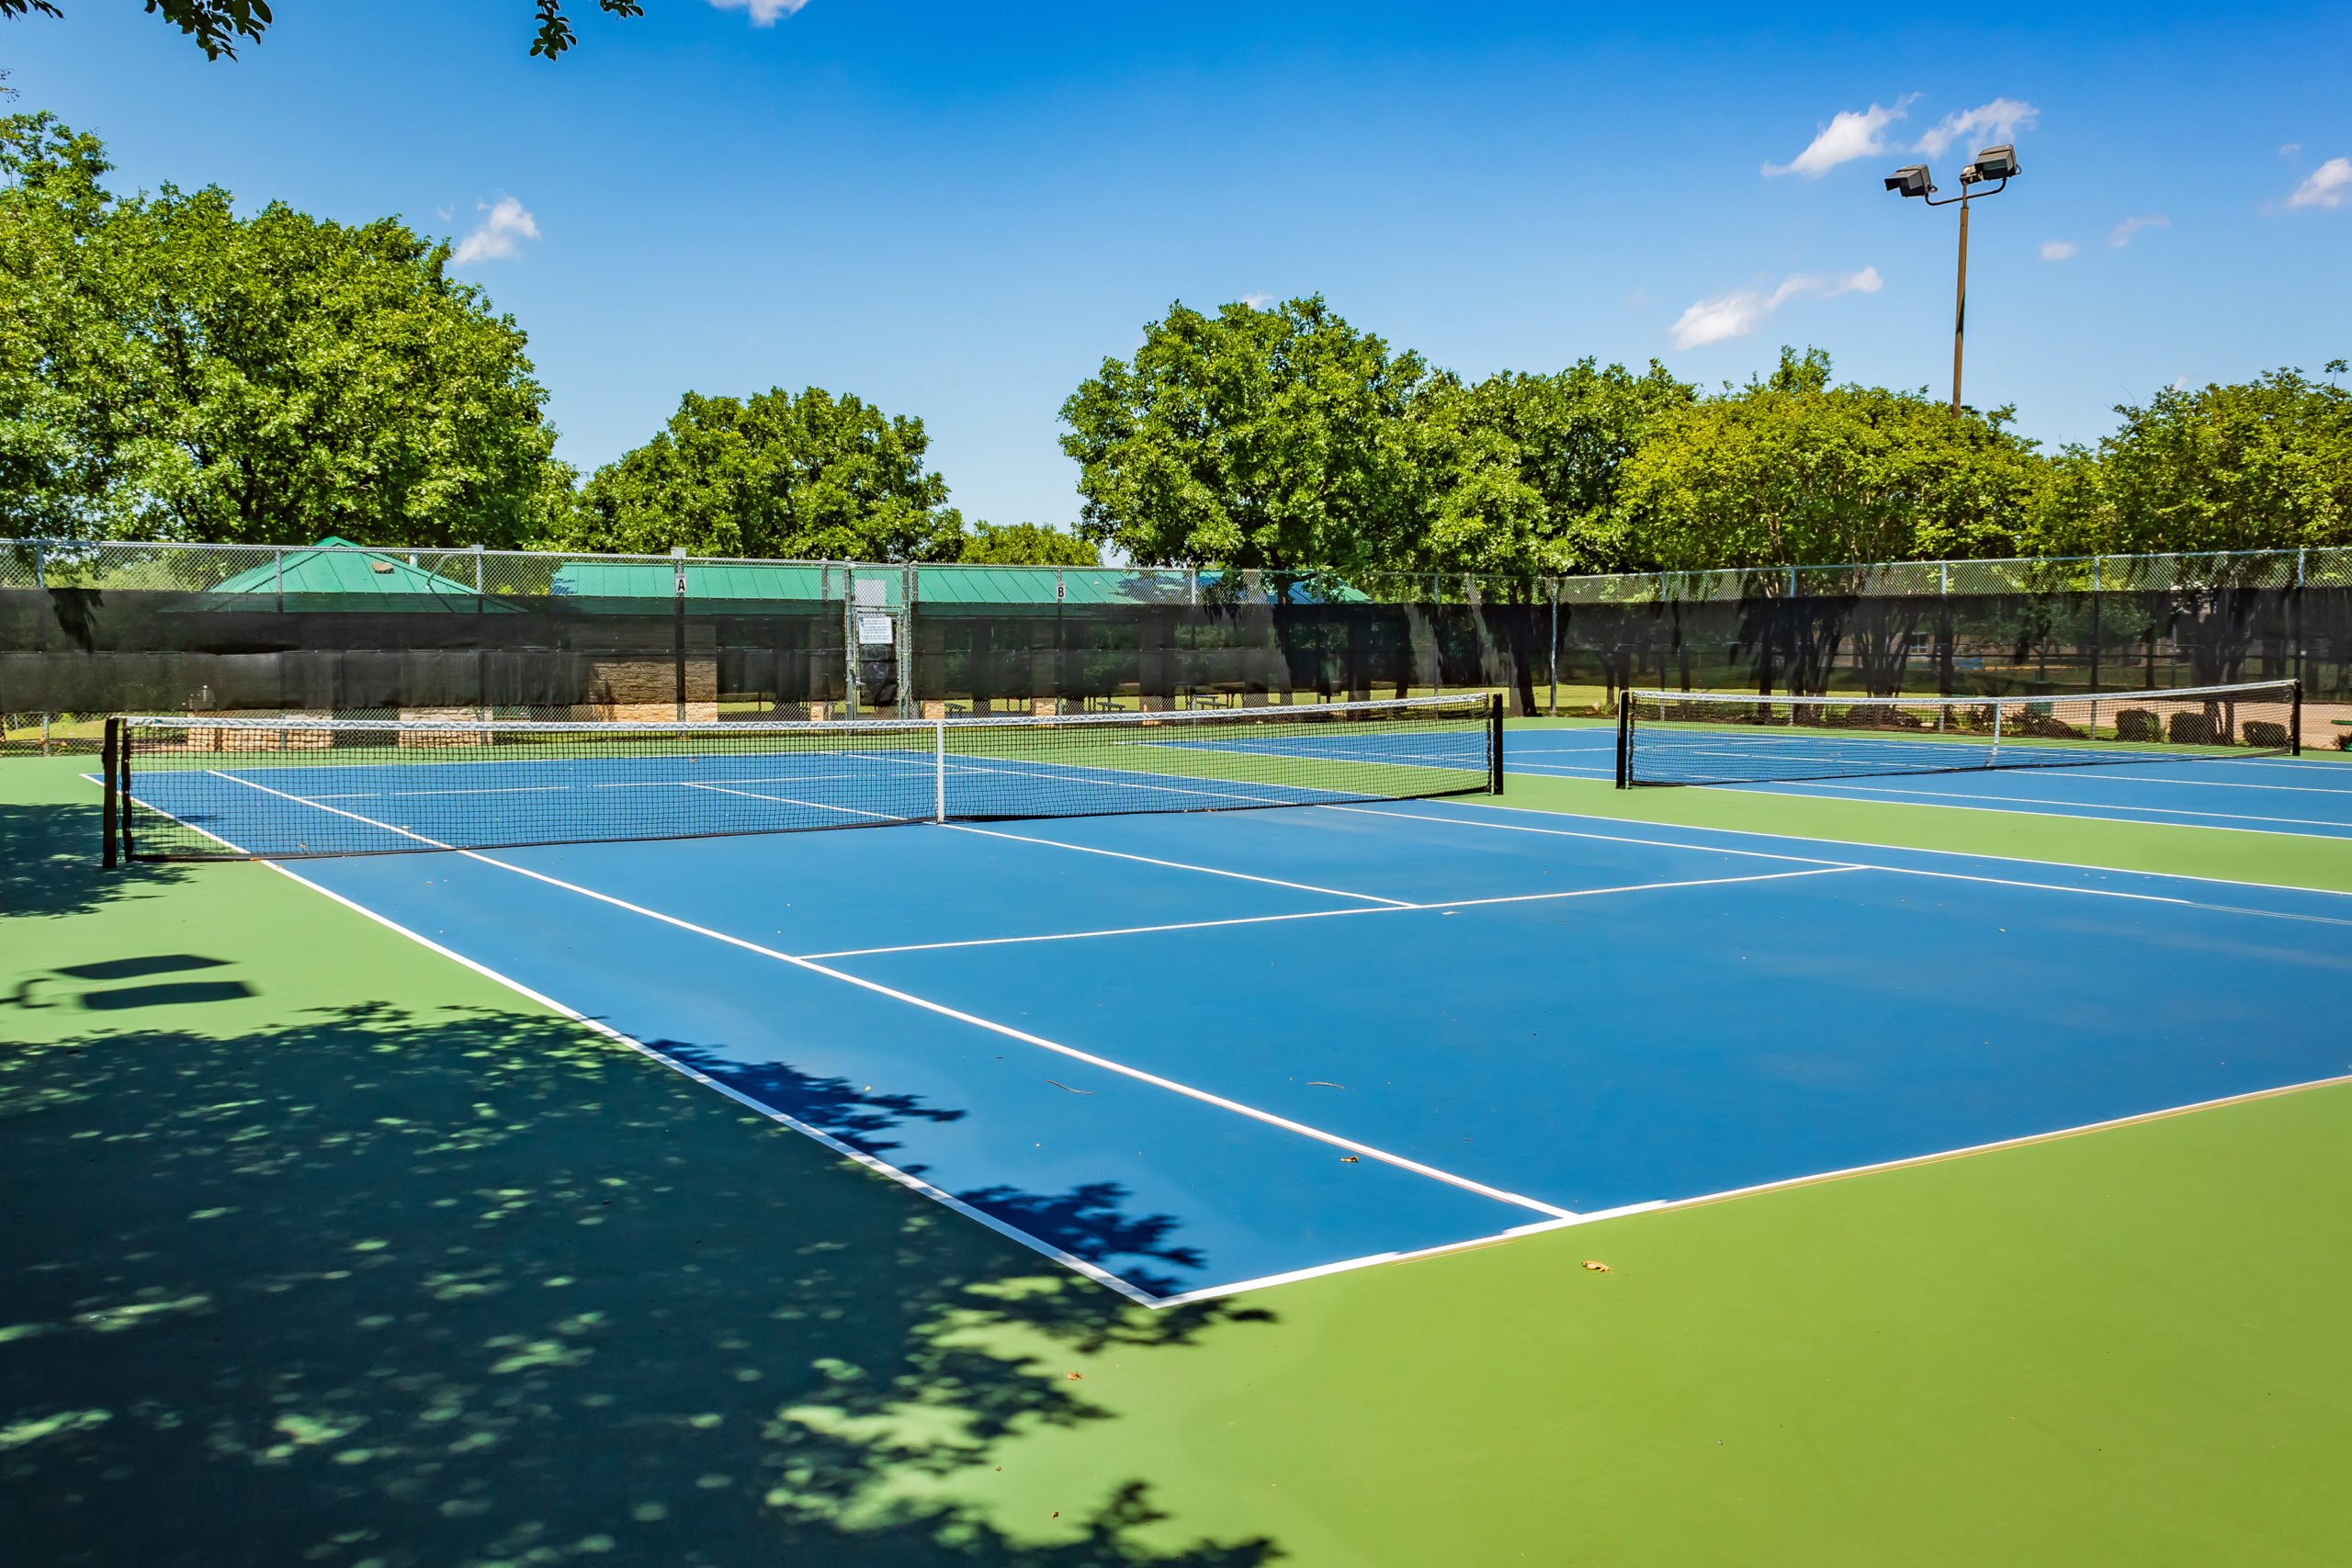 Picture of the tennis court at Fern Bluff Park.